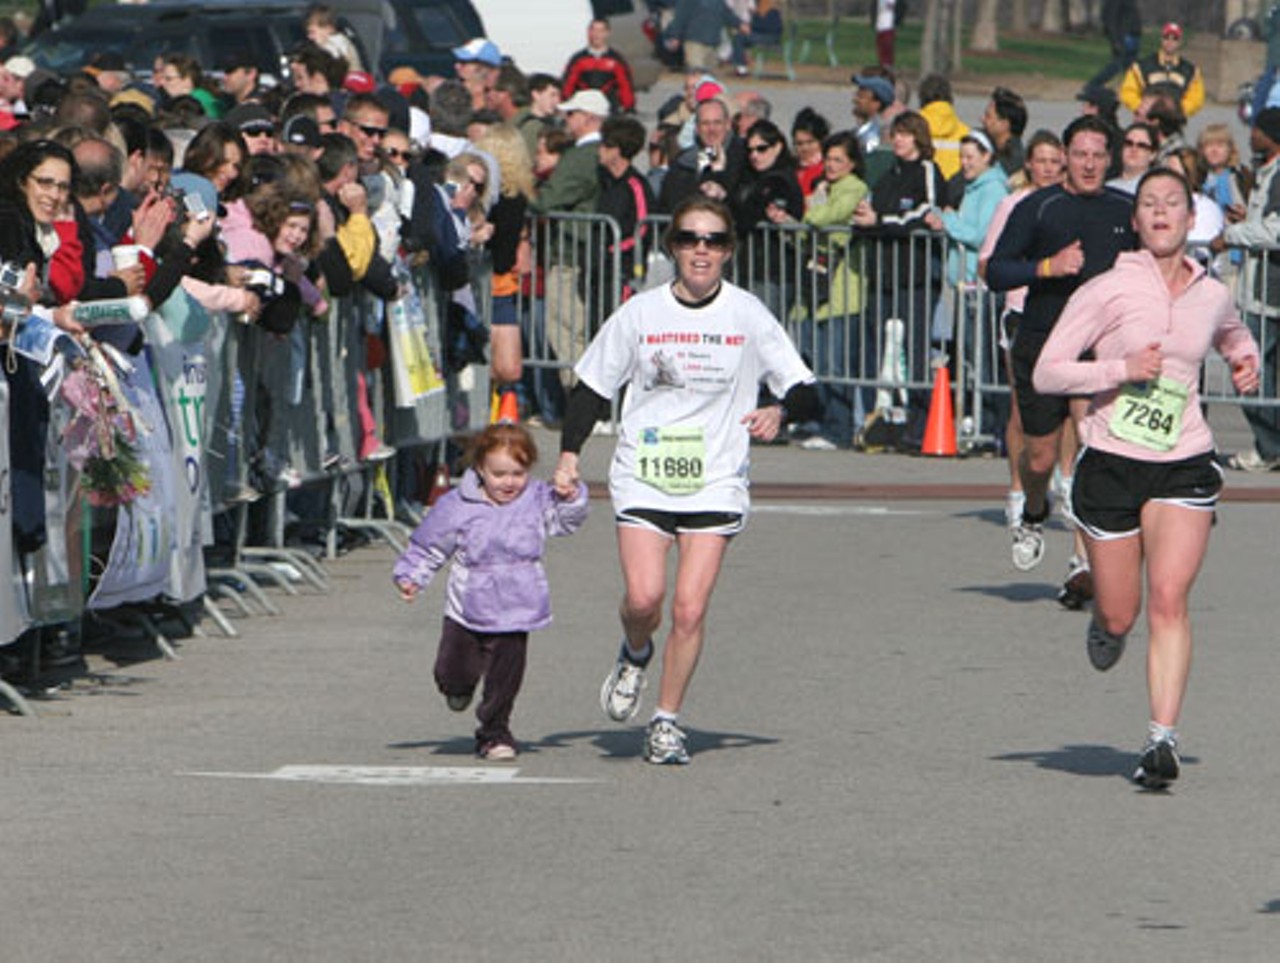 Kellee Marshall grabs her daughter, Kalee, with .1 mile left to cross the finish line together.